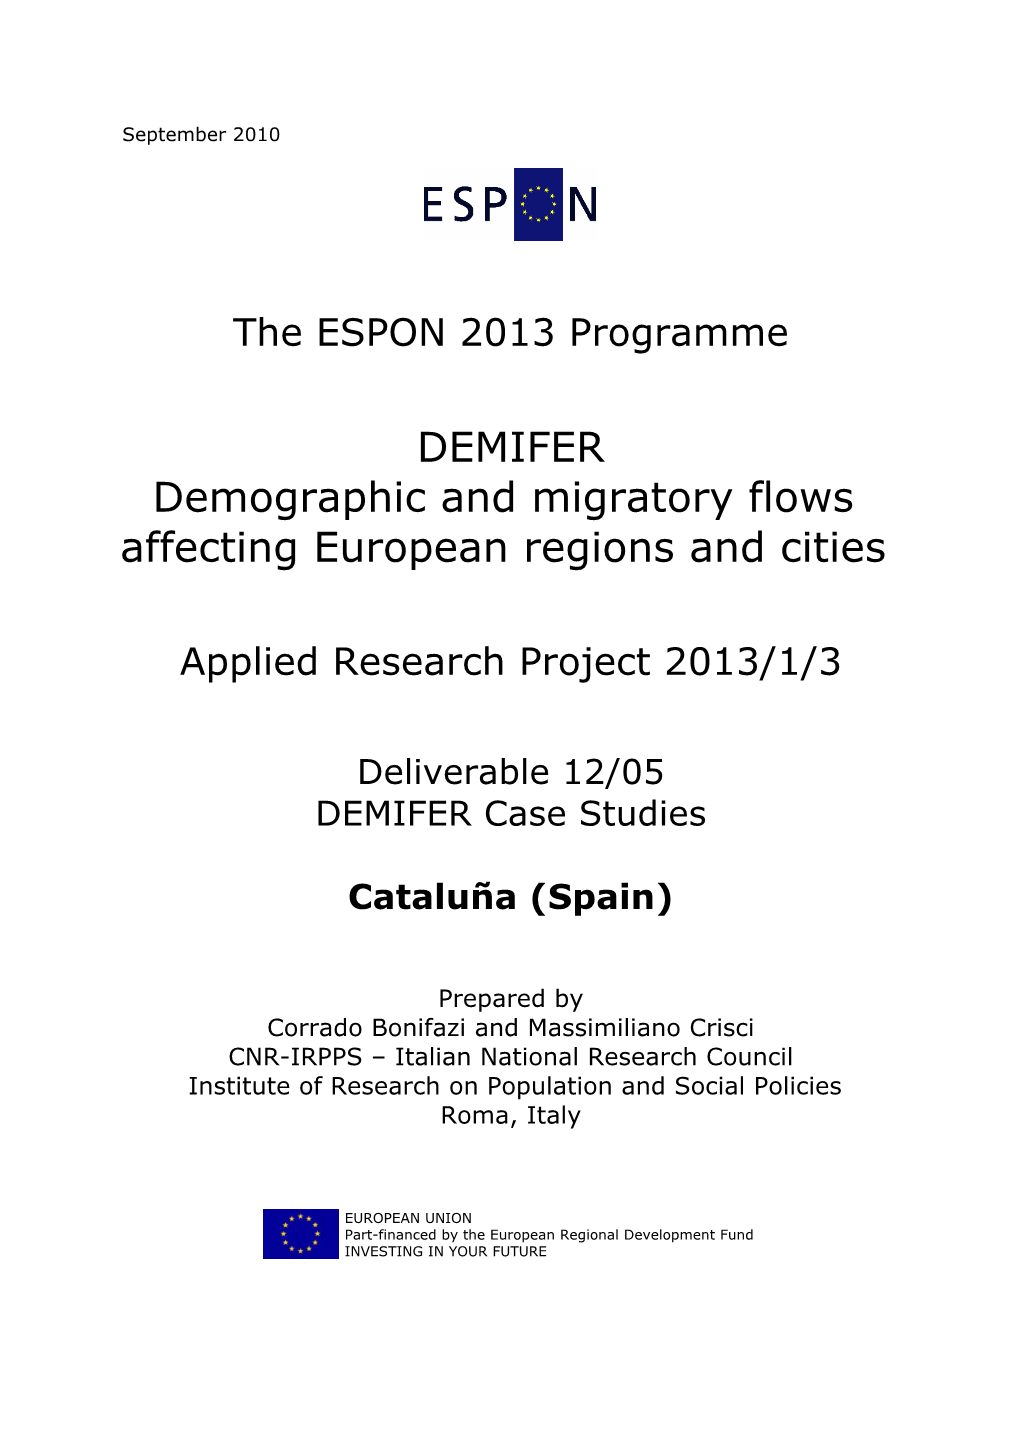 DEMIFER Demographic and Migratory Flows Affecting European Regions and Cities